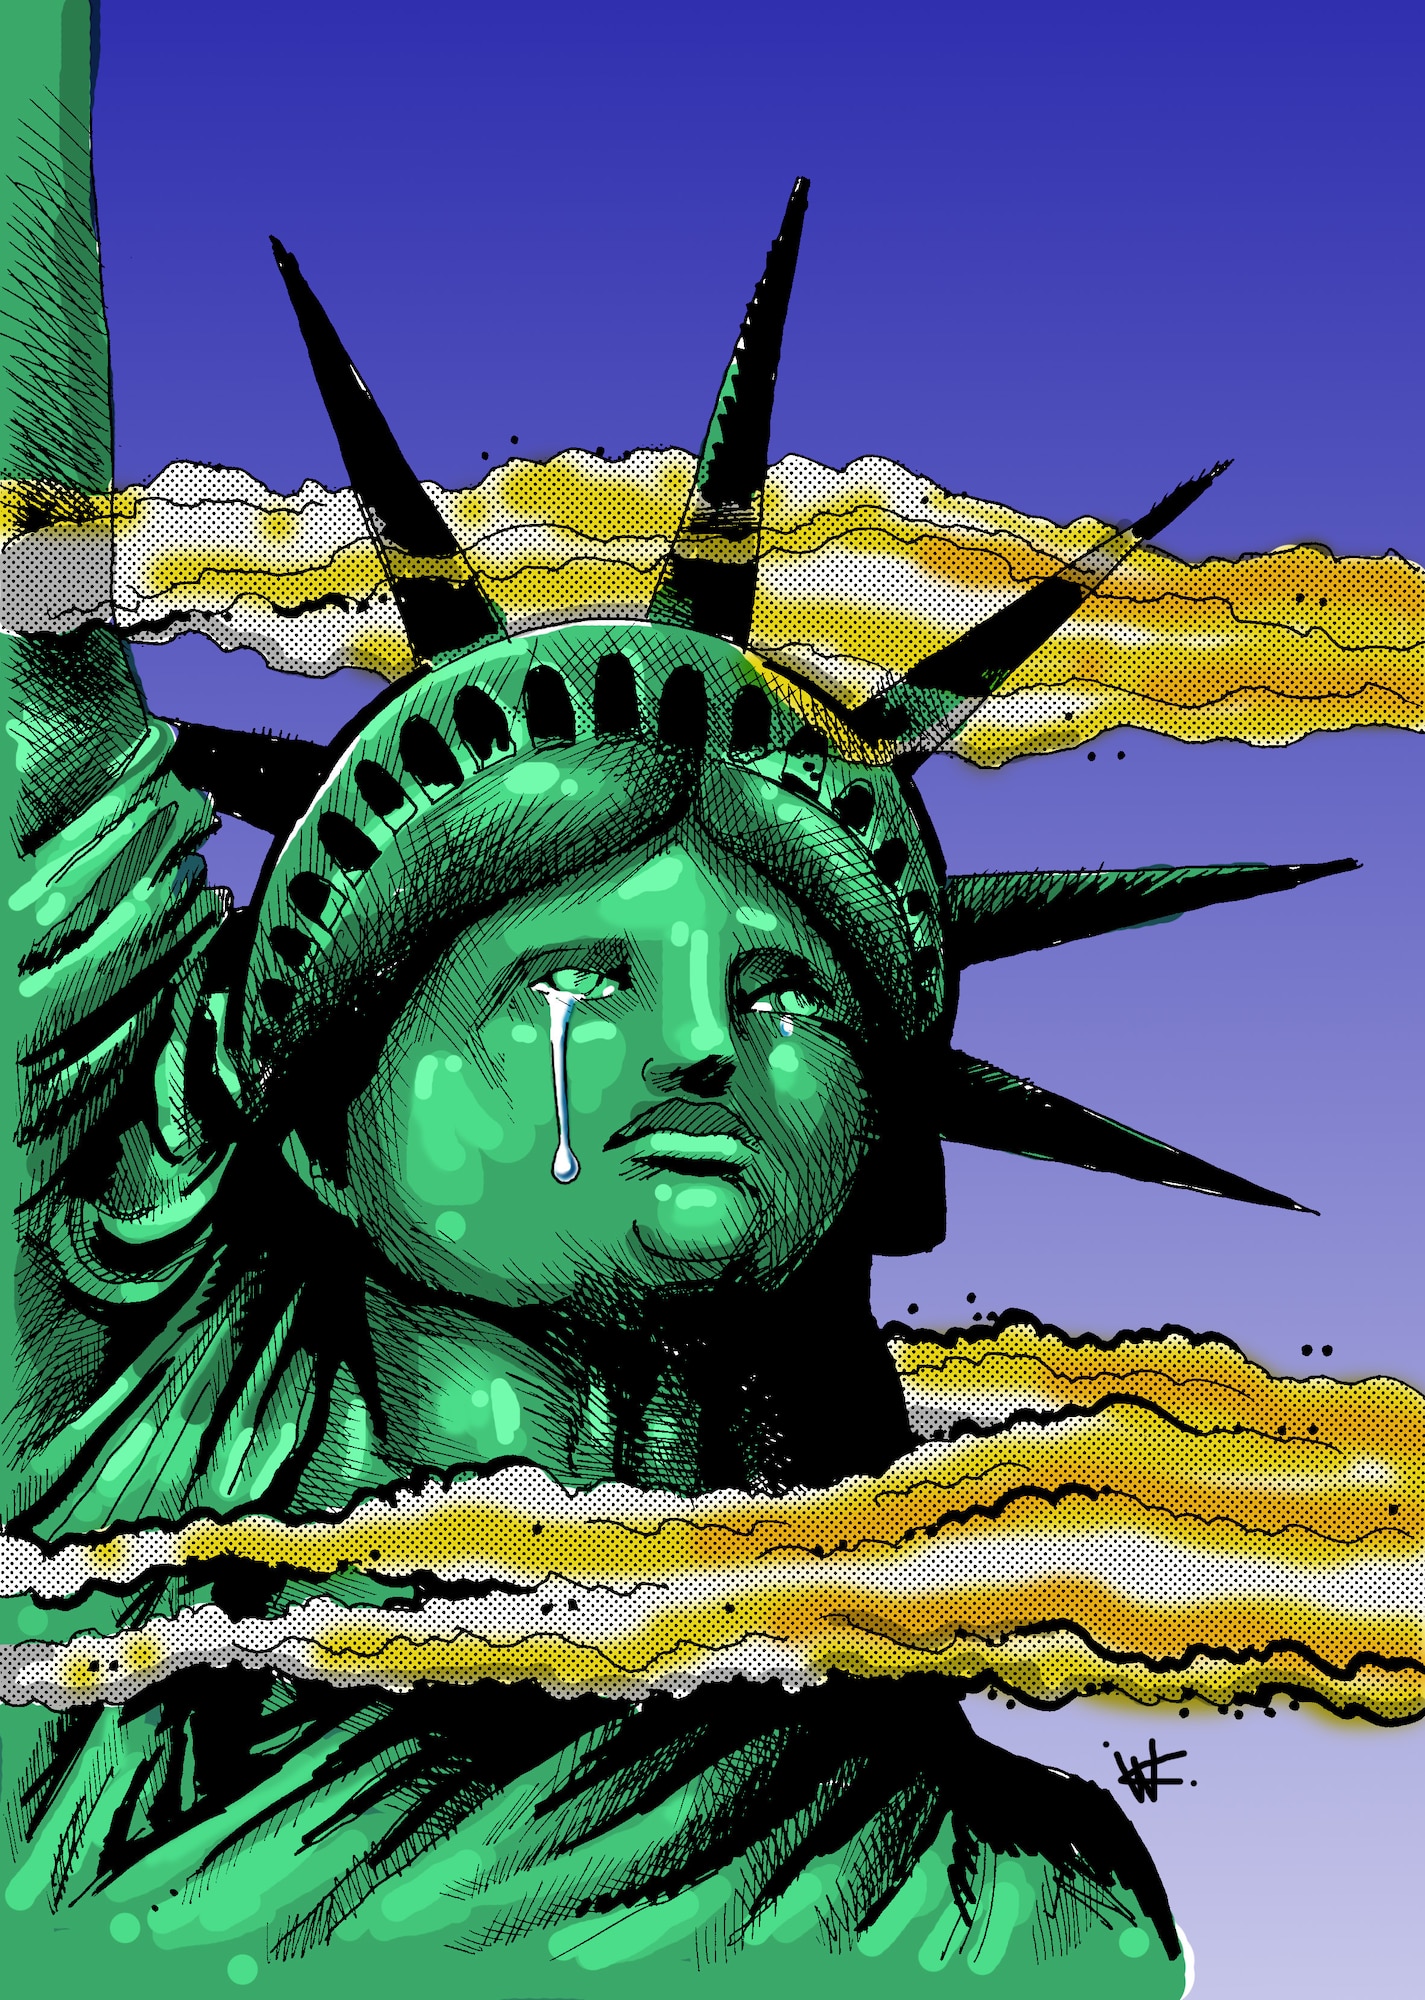 911 Statue of Liberty crying
Pen and ink drawing, digitally colored